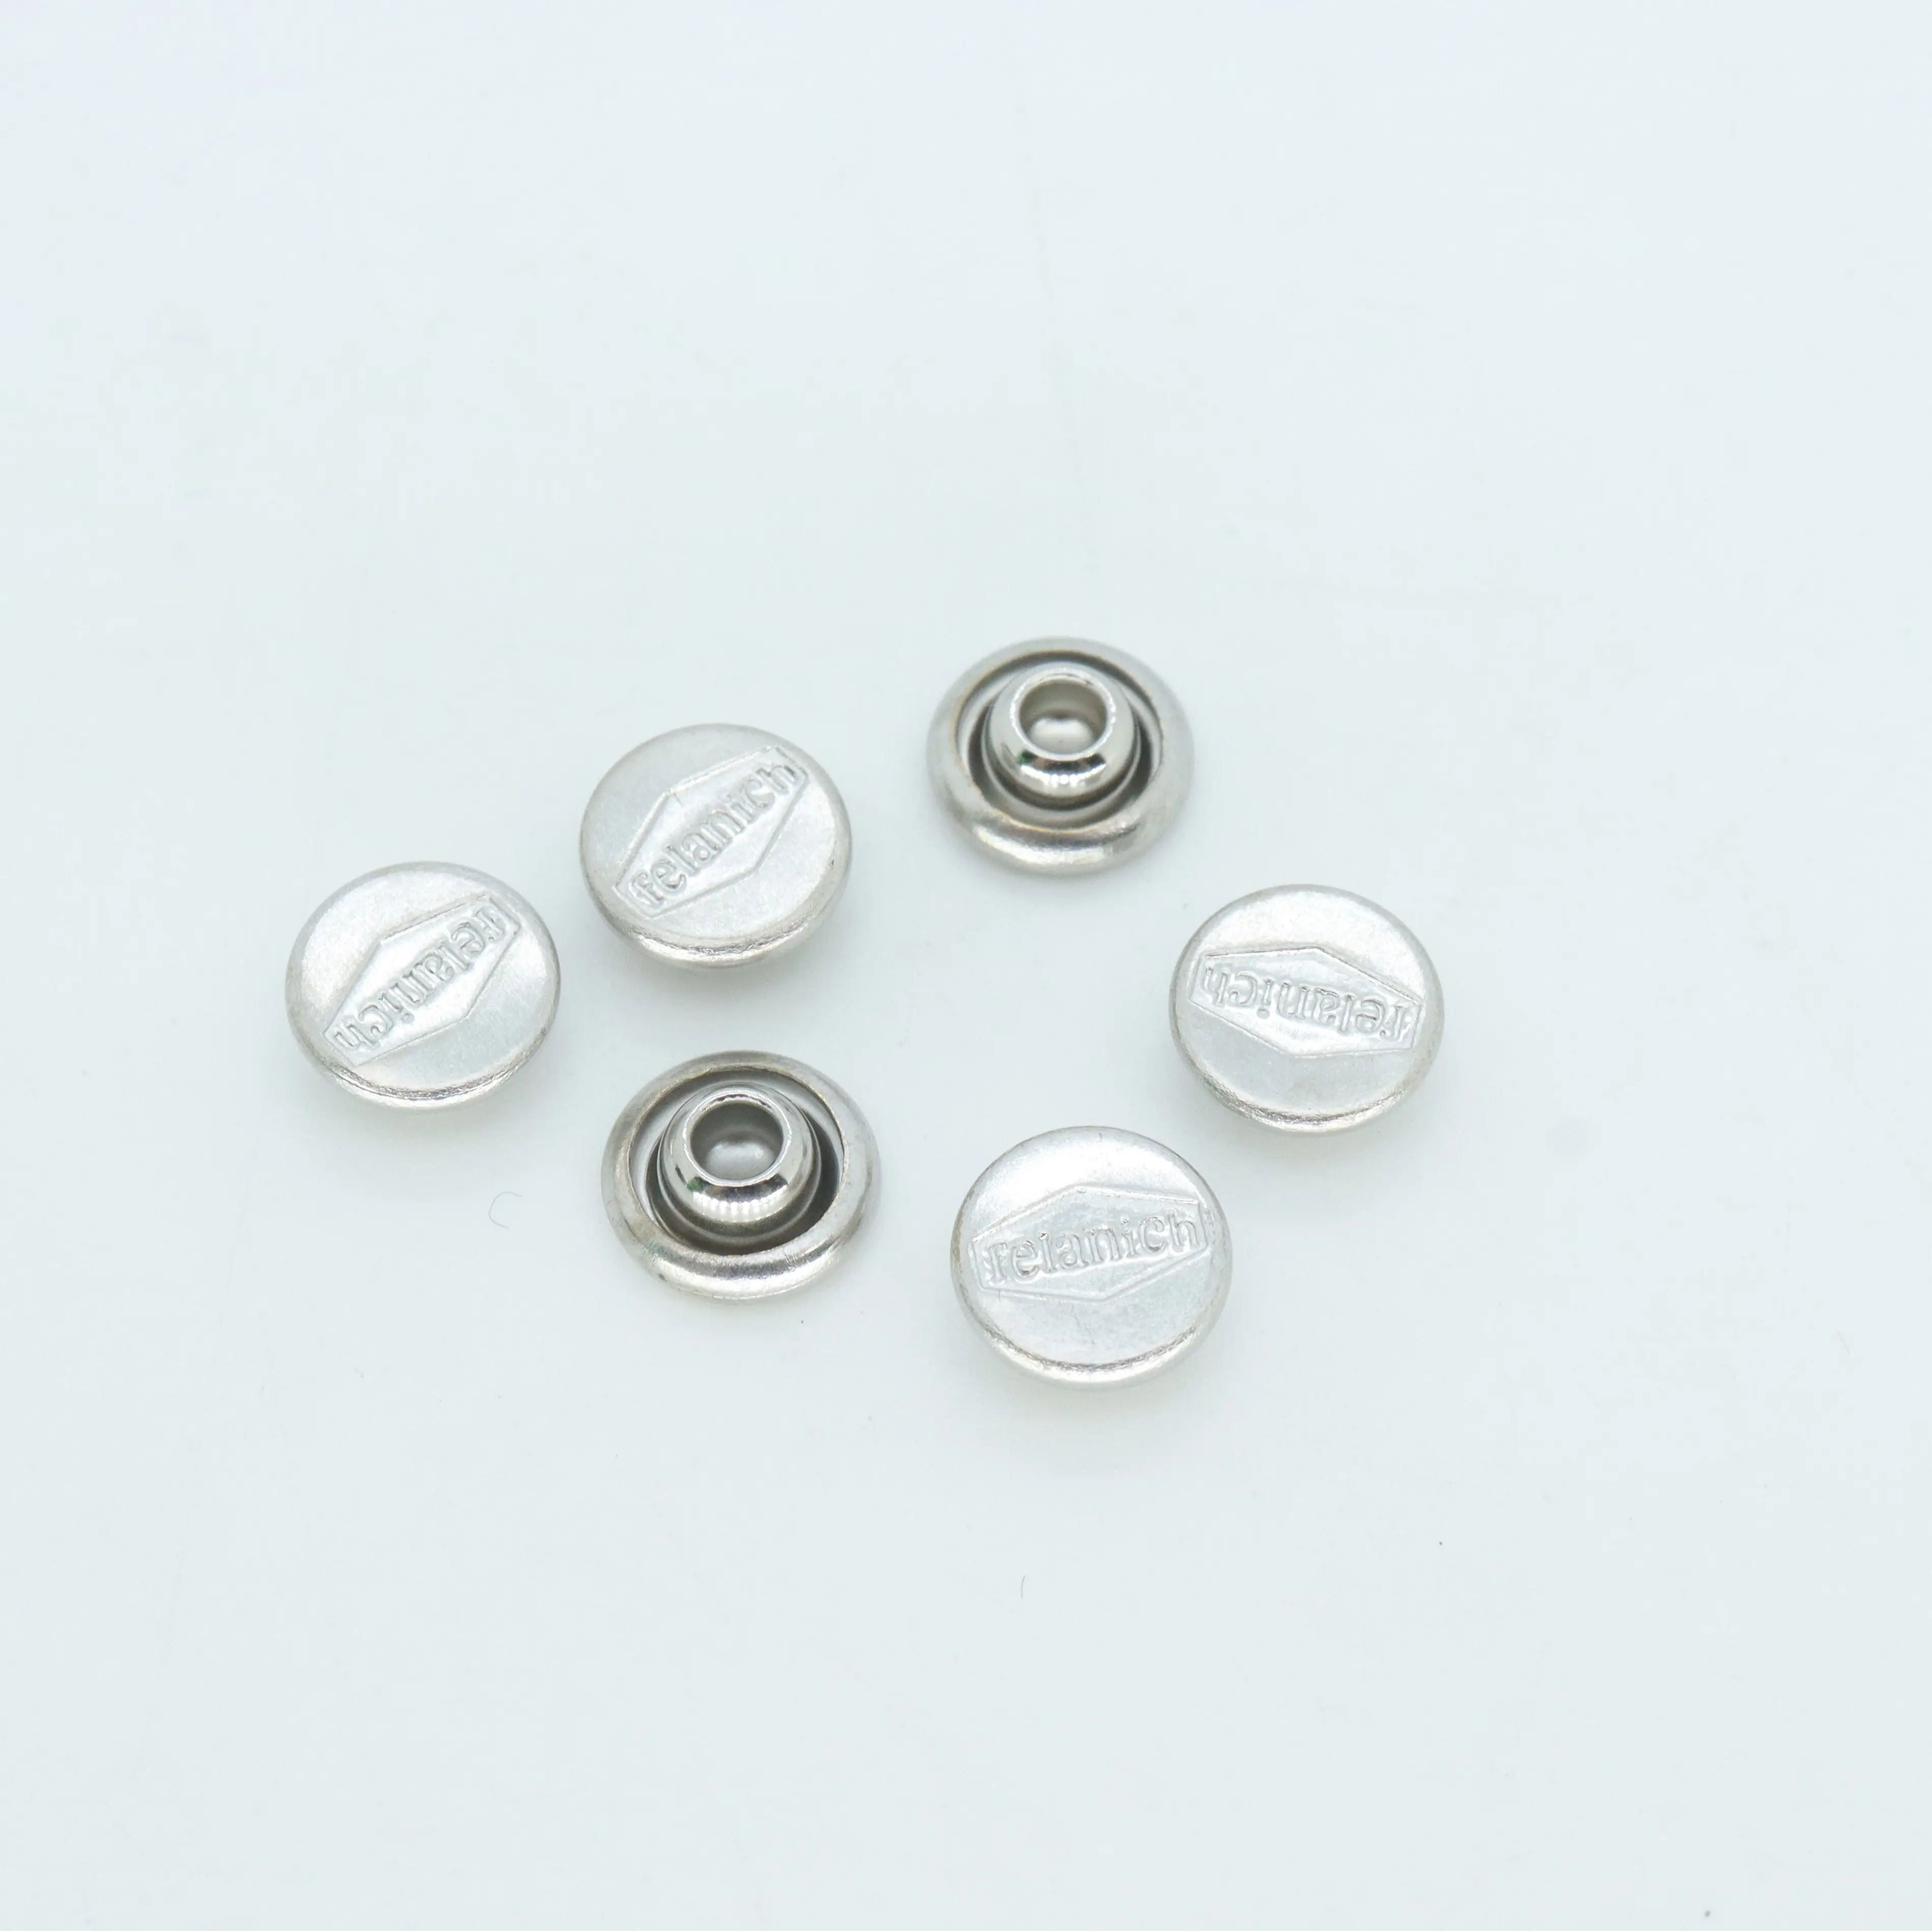 High quality colorful embossed decorative rivets for  leather coat